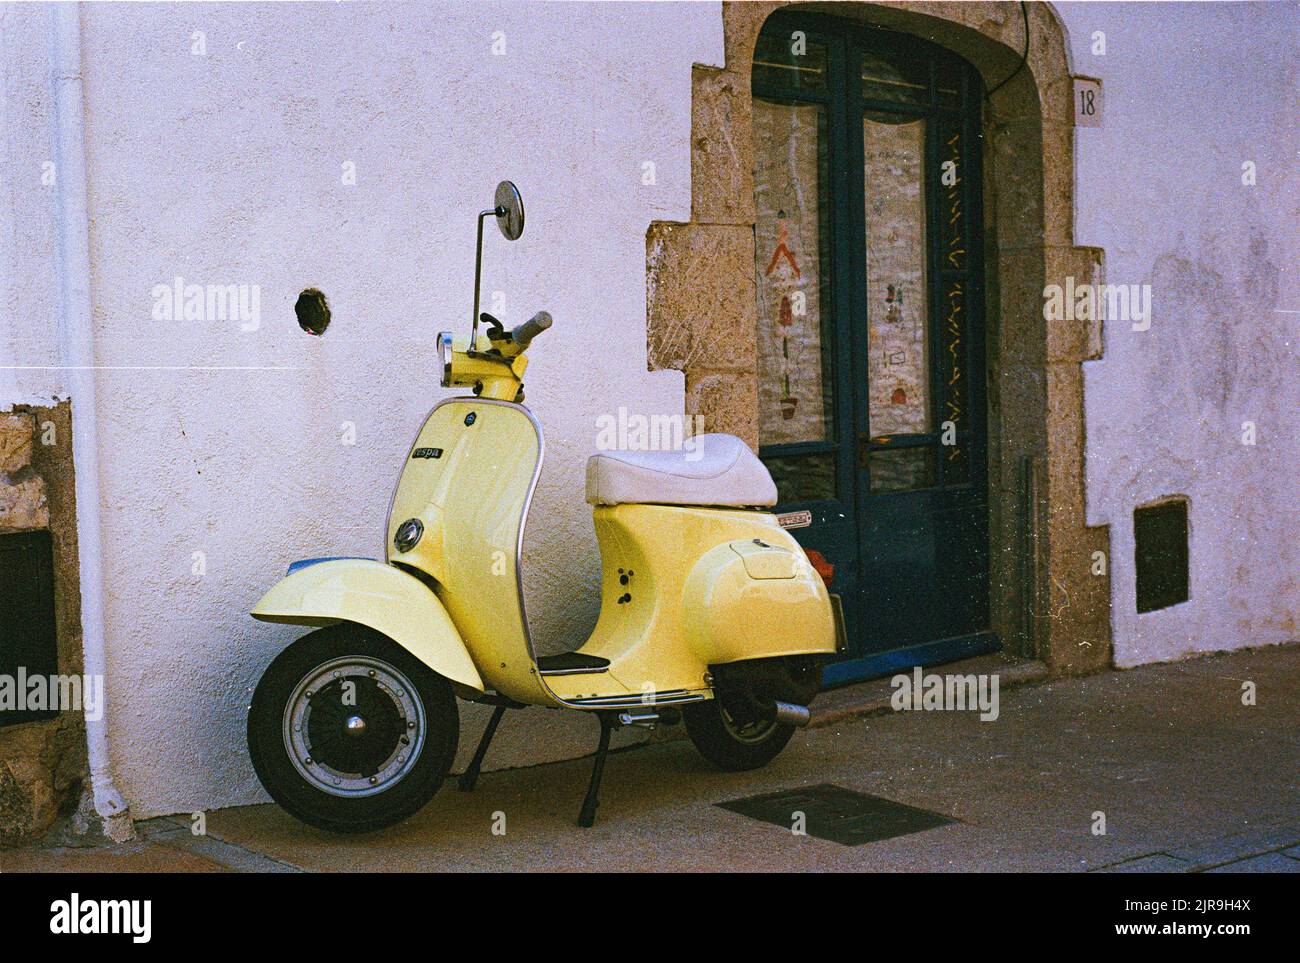 An Italian yellow Vespa scooter parked in front of a white building Stock Photo